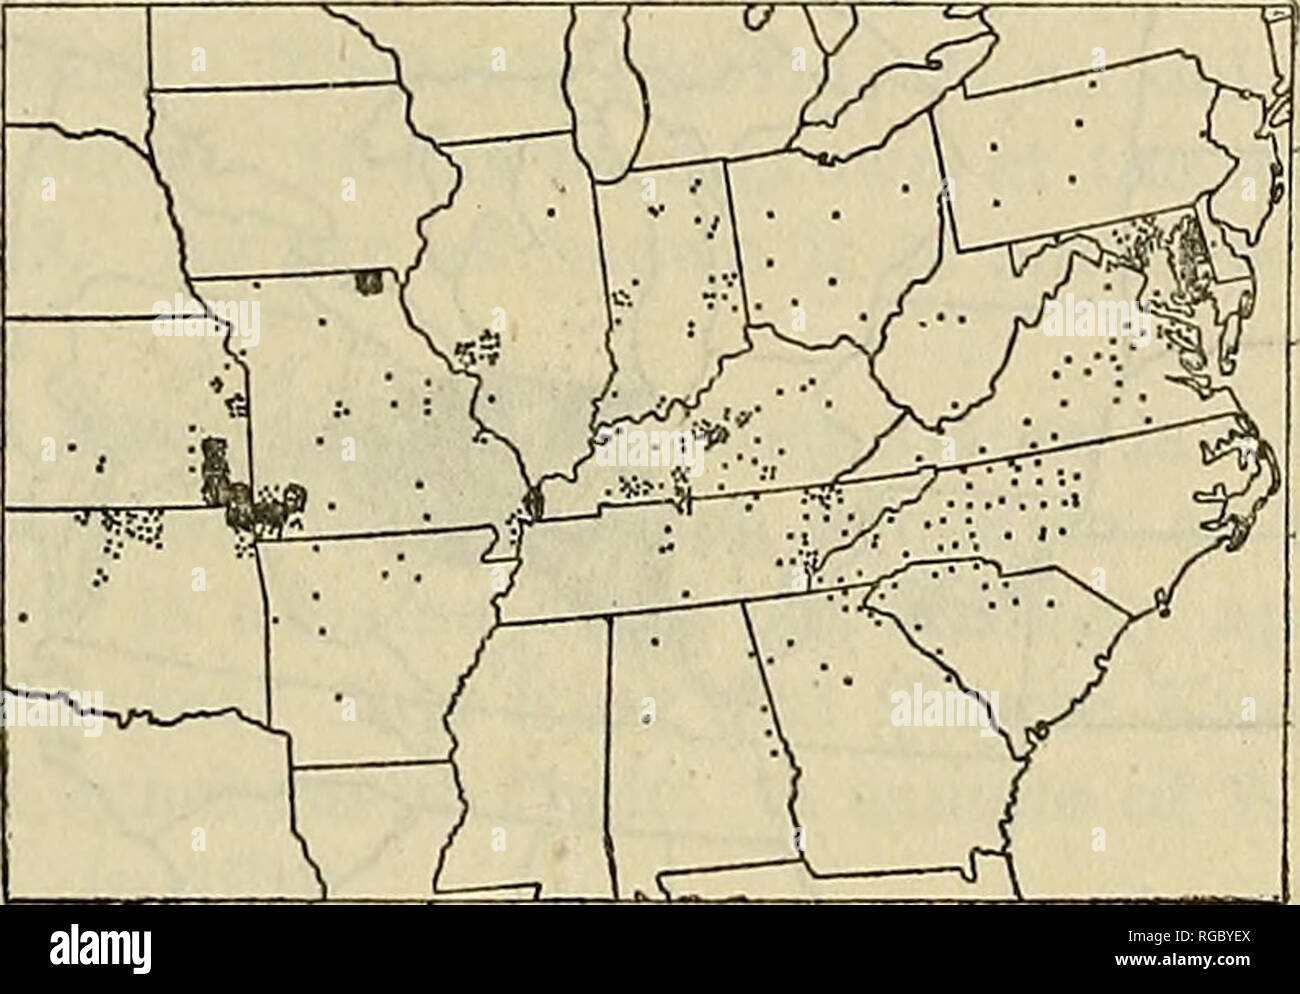 . Bulletin of the U.S. Department of Agriculture. Agriculture; Agriculture. CLASSIFICATION OF AMERICAN WHEAT VARIETIES. Ill Distribution.—Grown in Alabama, Arkansas, Delaware, Georgia, Illinois, Indiana, Kansas, Kentucky, Maryland, Missouri, North Carolina, Ohio, Okla- homa, Pennsylvania. South Carolina, Tennessee, Virginia, and West Virginia. The distribution is shown in Figure 41. Synonyms.—Gill, Golden Chaff, Pearl Prolific, Perfection, Prettybone, Prolific,. Red Odessa, Red Prolific, and Tennessee Prolific. Gill is a name used for Currell by growers in Kentucky. The name is also used for t Stock Photo